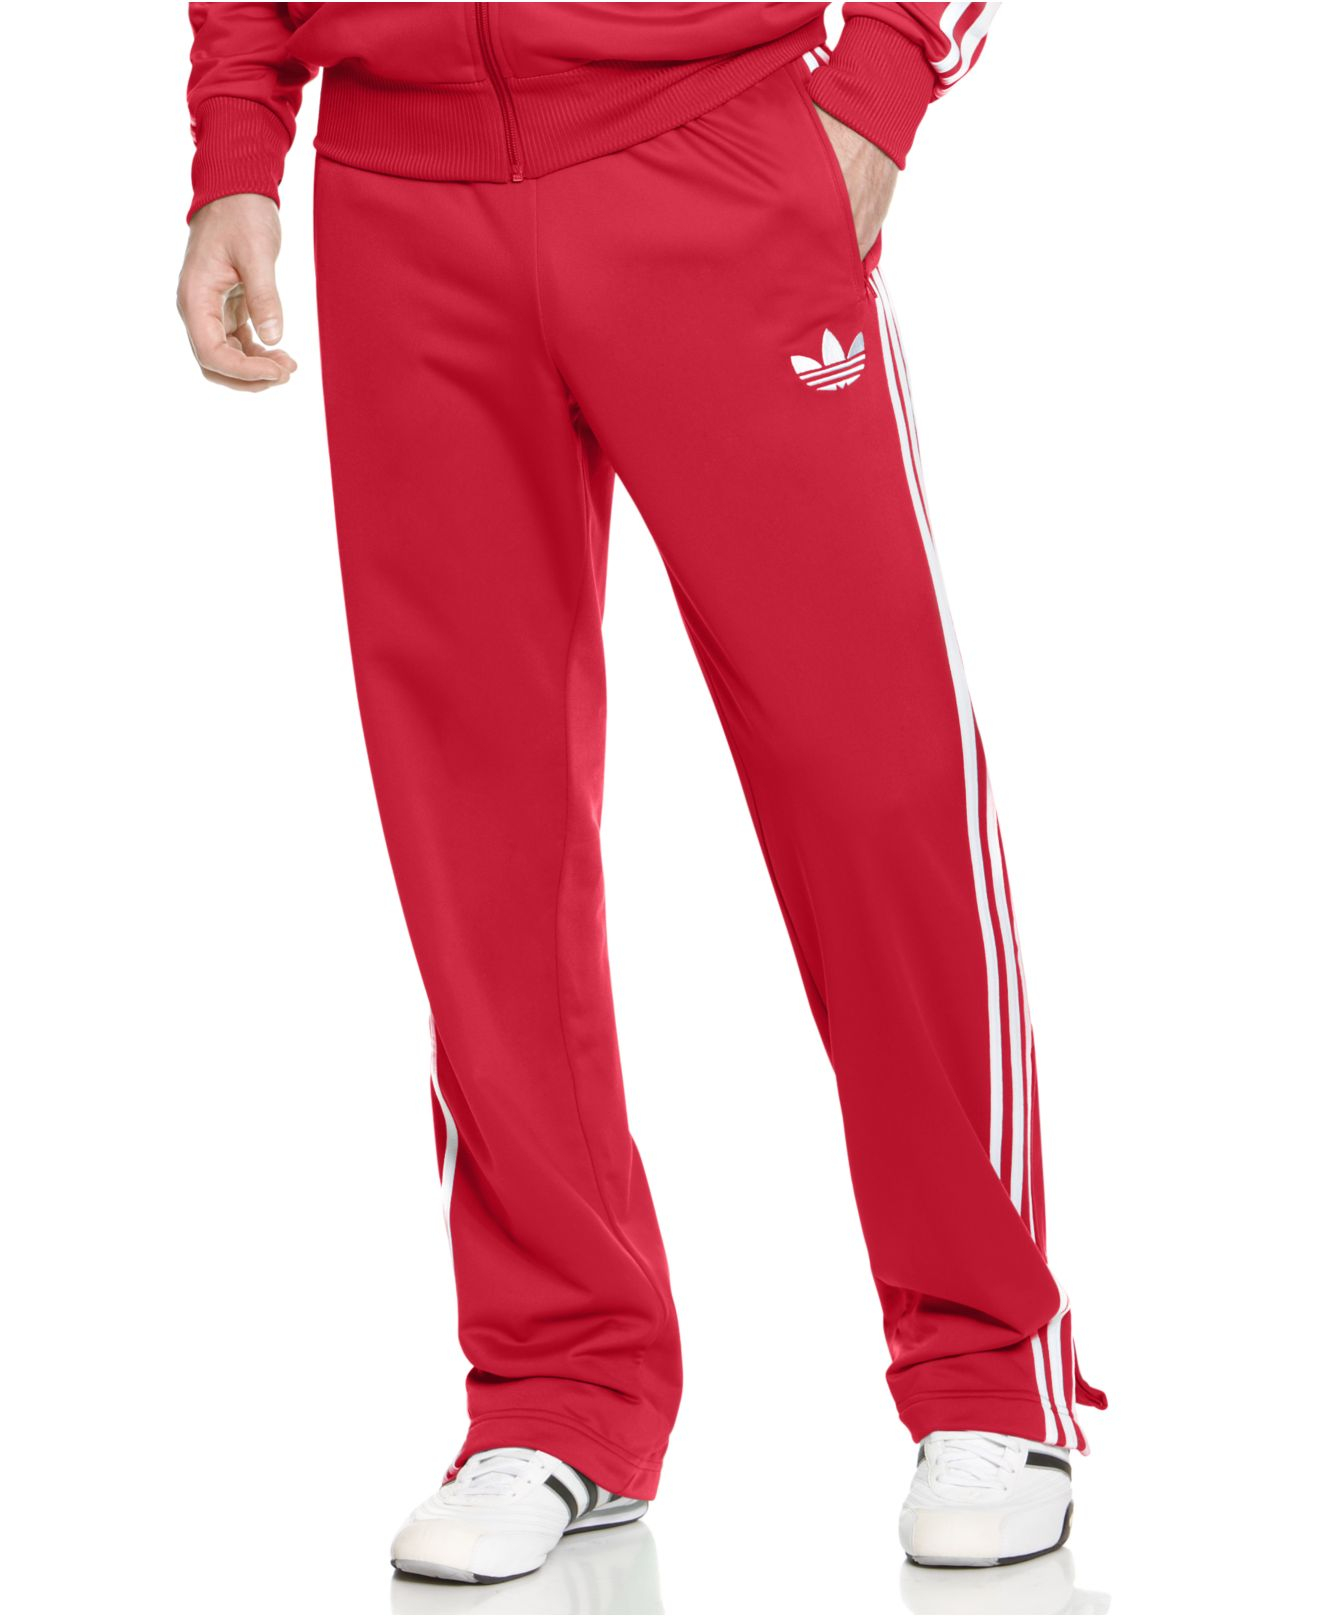 Lyst - Adidas Adi Firebird Track Pants in Red for Men